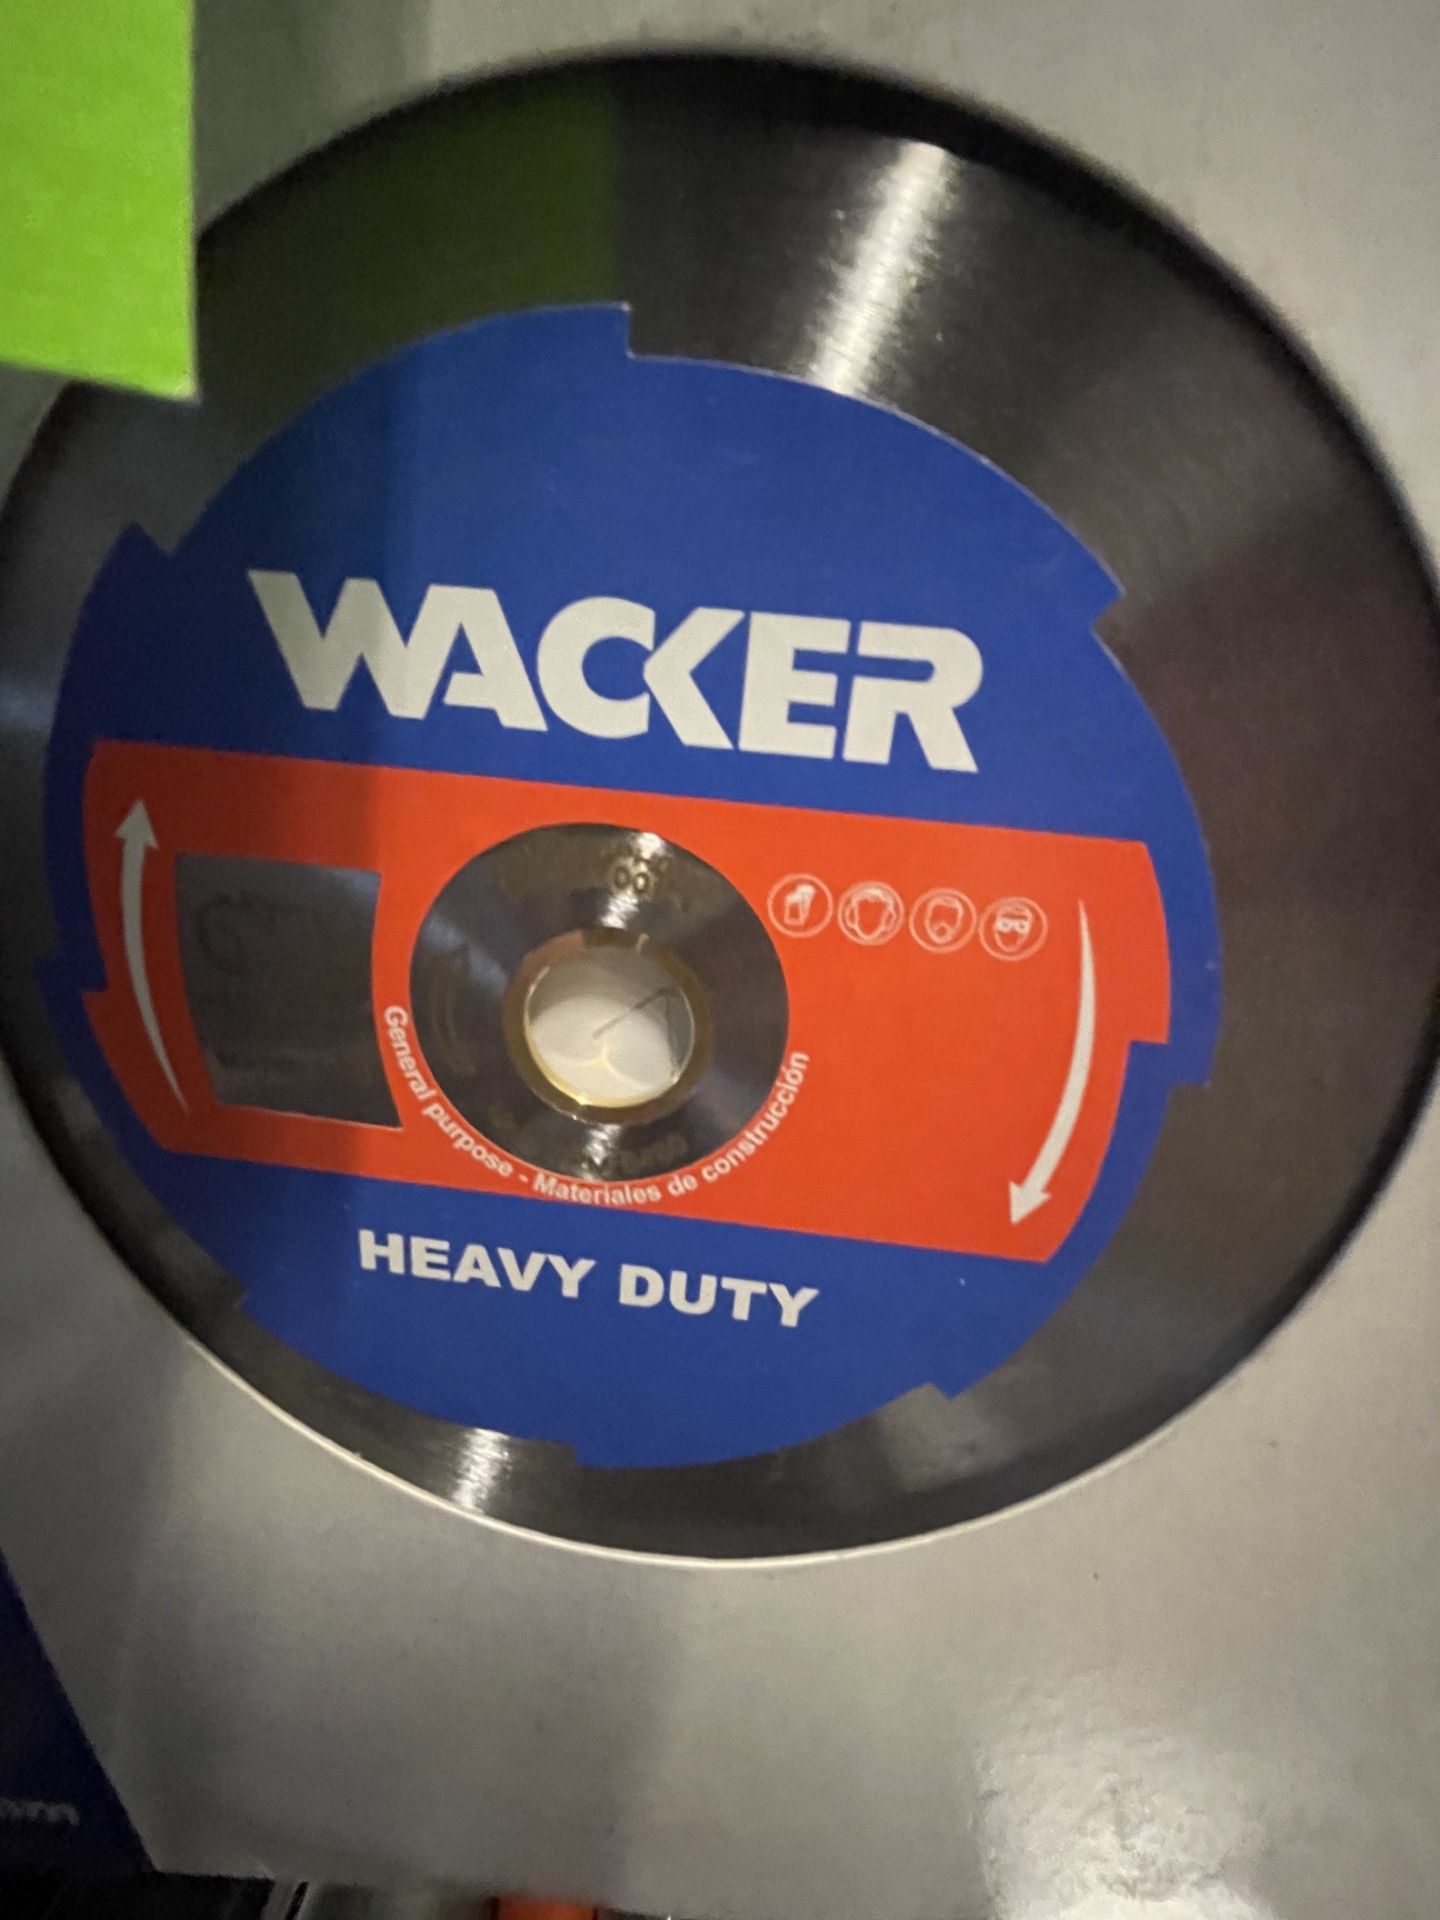 (2) NEW WACKER HEACY DUTY SAW BLADE, 14", 350 MM (ALL PURCHASES MUST BE PAID FOR AND REMOVED BY 5/ - Image 2 of 3